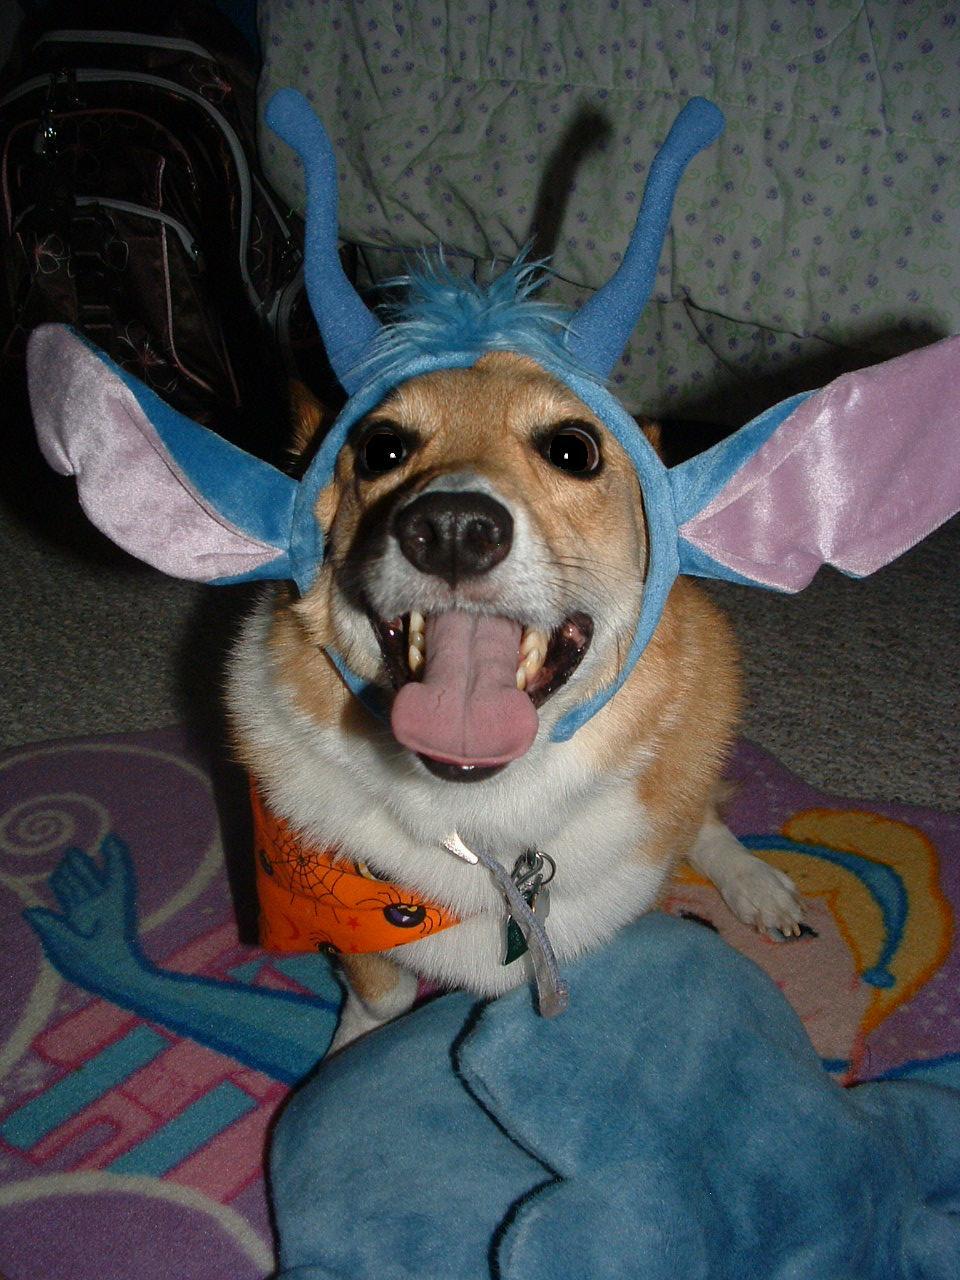 Corgi wearing a stitch head piece while sitting in tis bed at night